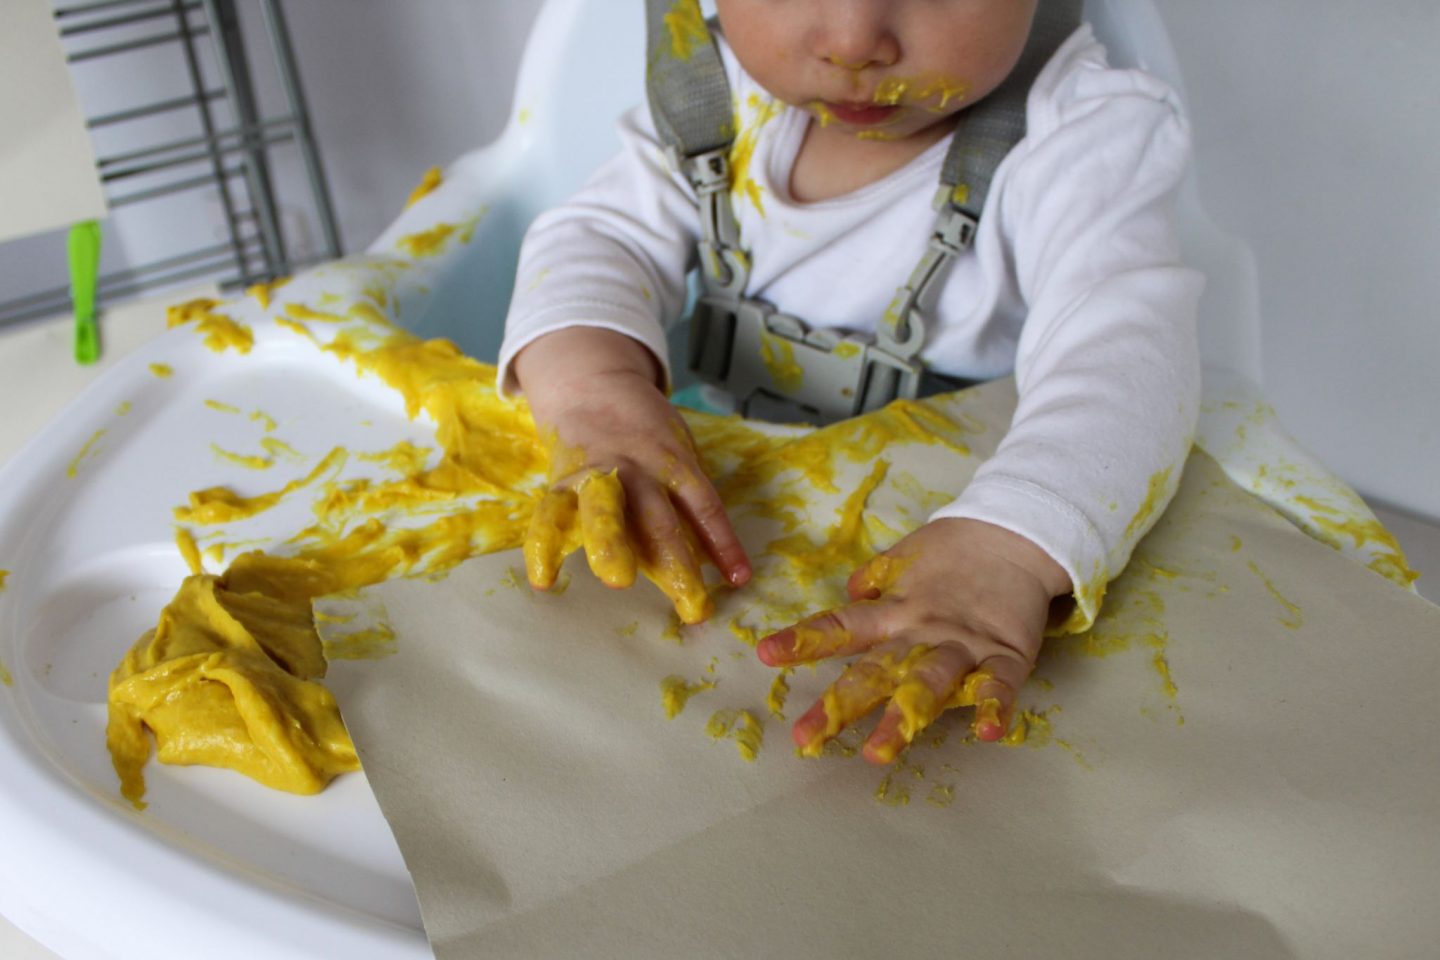 Edible paint for babies and toddlers